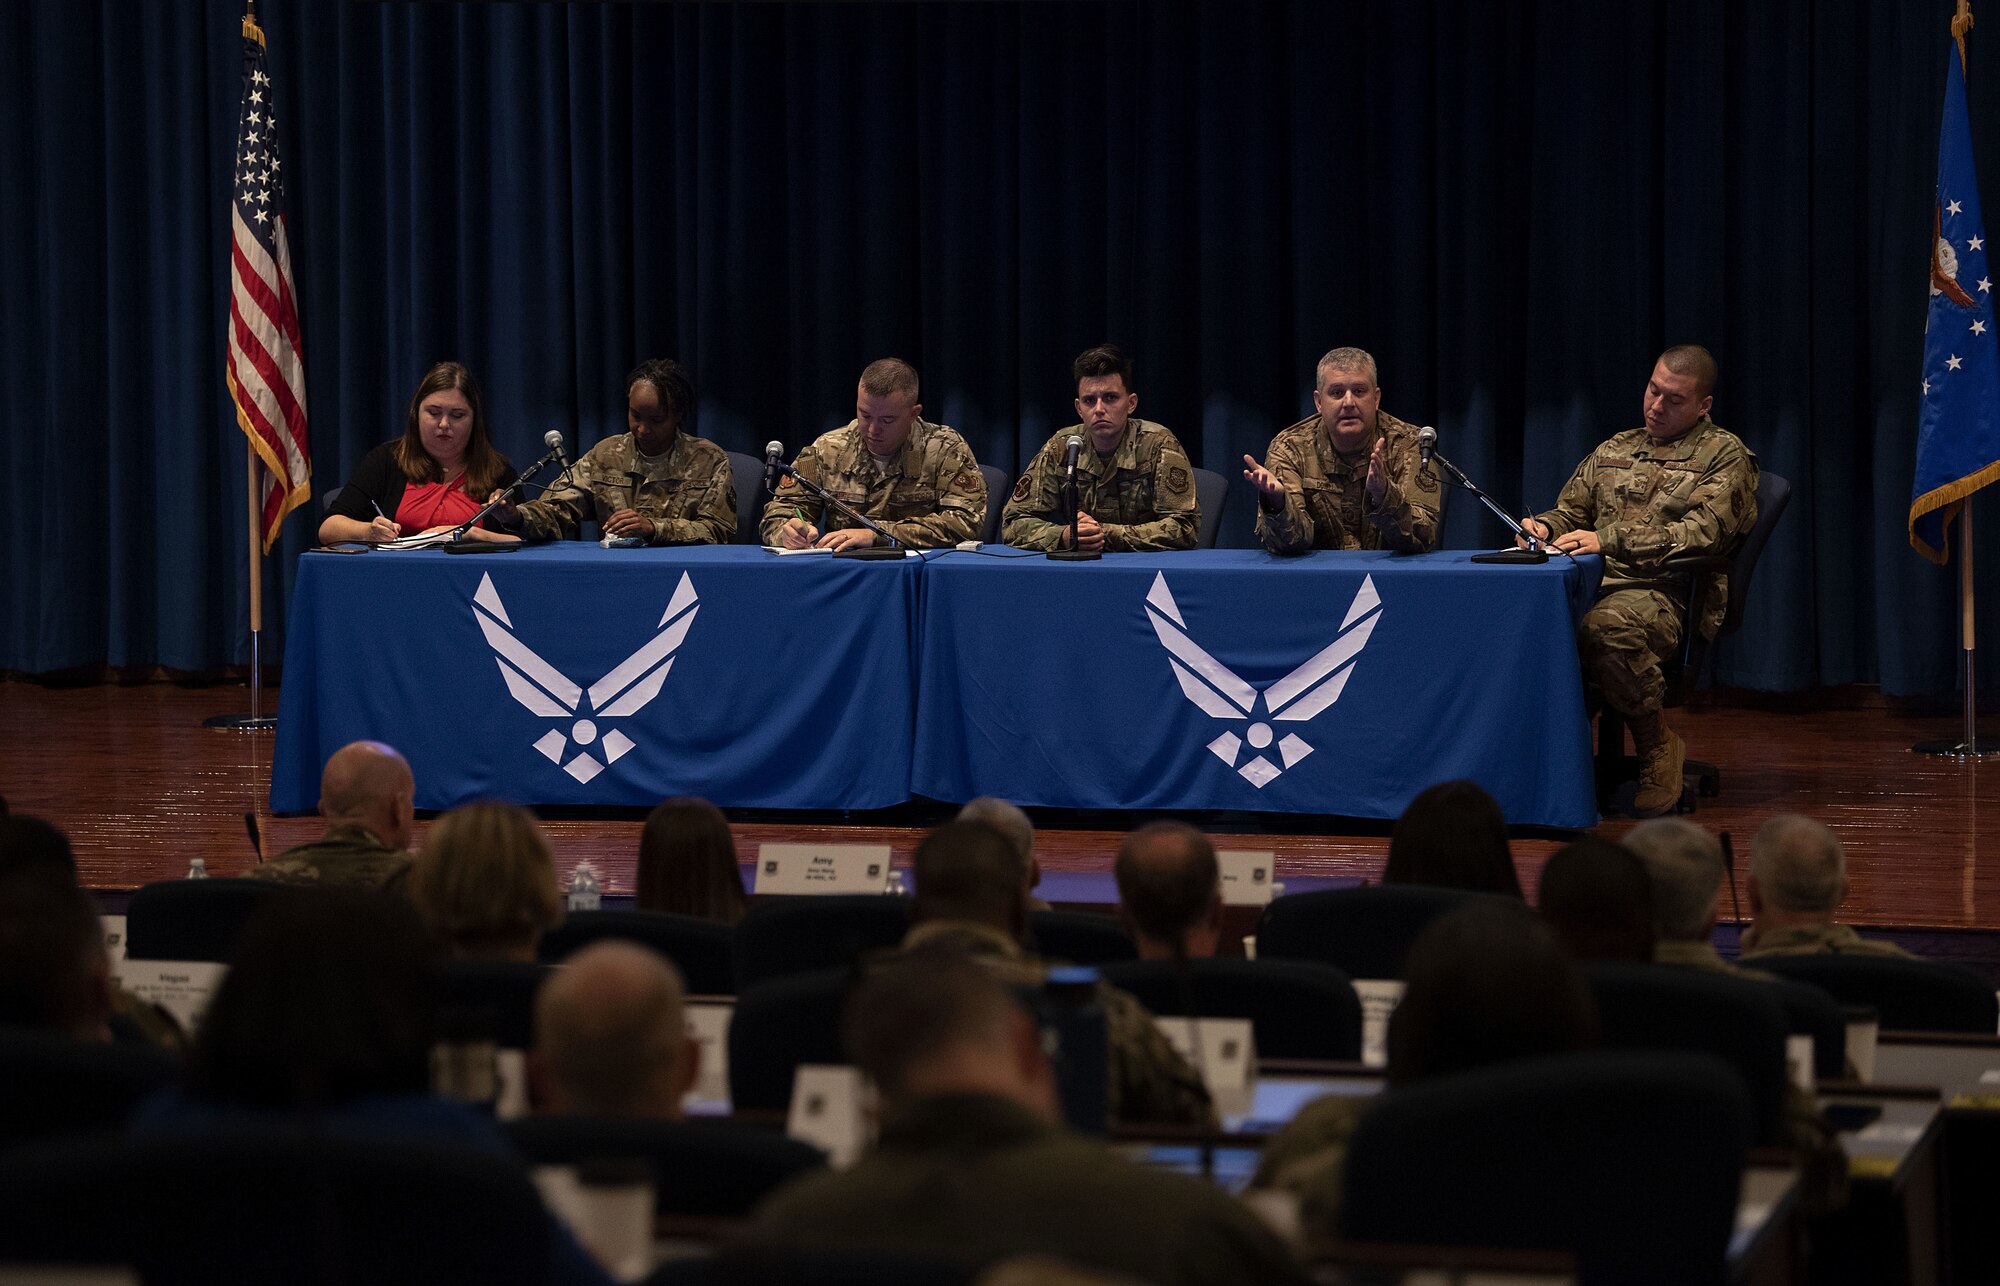 Air Mobility Command (AMC) Airmen share personal stories on how they persevere through adversity during a resiliency panel as part of the 2019 Fall Phoenix Rally, Oct. 8, 2019, in the U.S. Air Force Expeditionary Center at Joint Base McGuire-Dix-Lakehurst, New Jersey